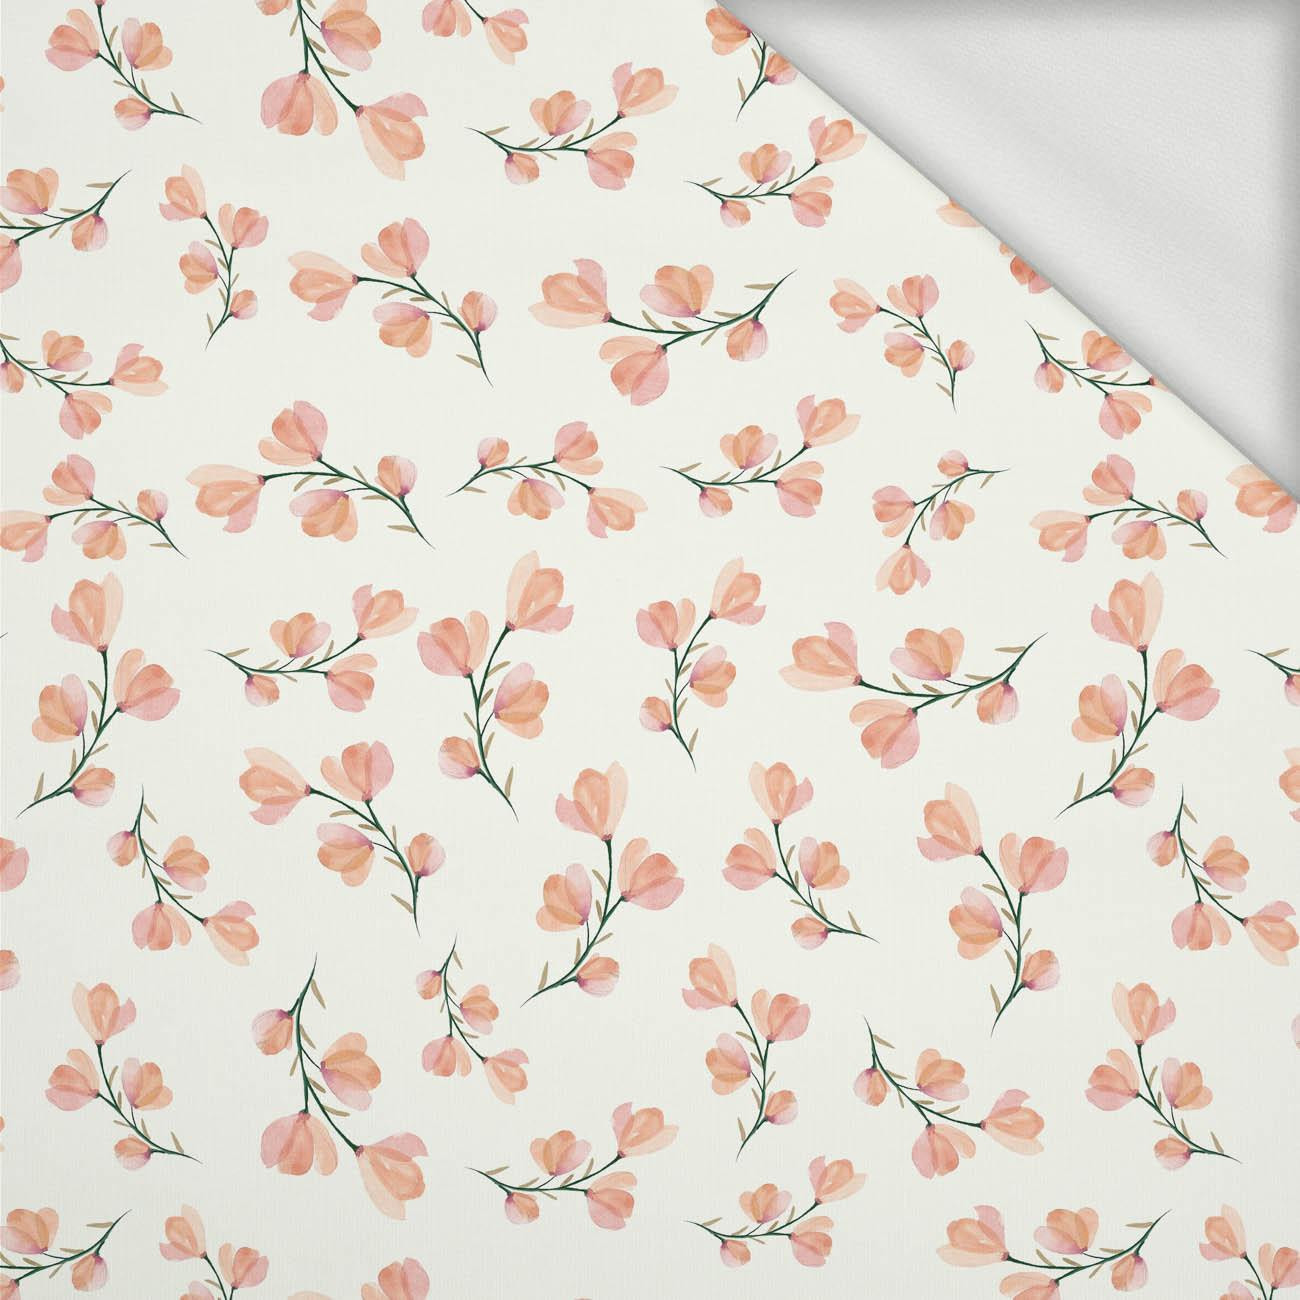 PINK FLOWERS PAT. 4 / white - looped knit fabric